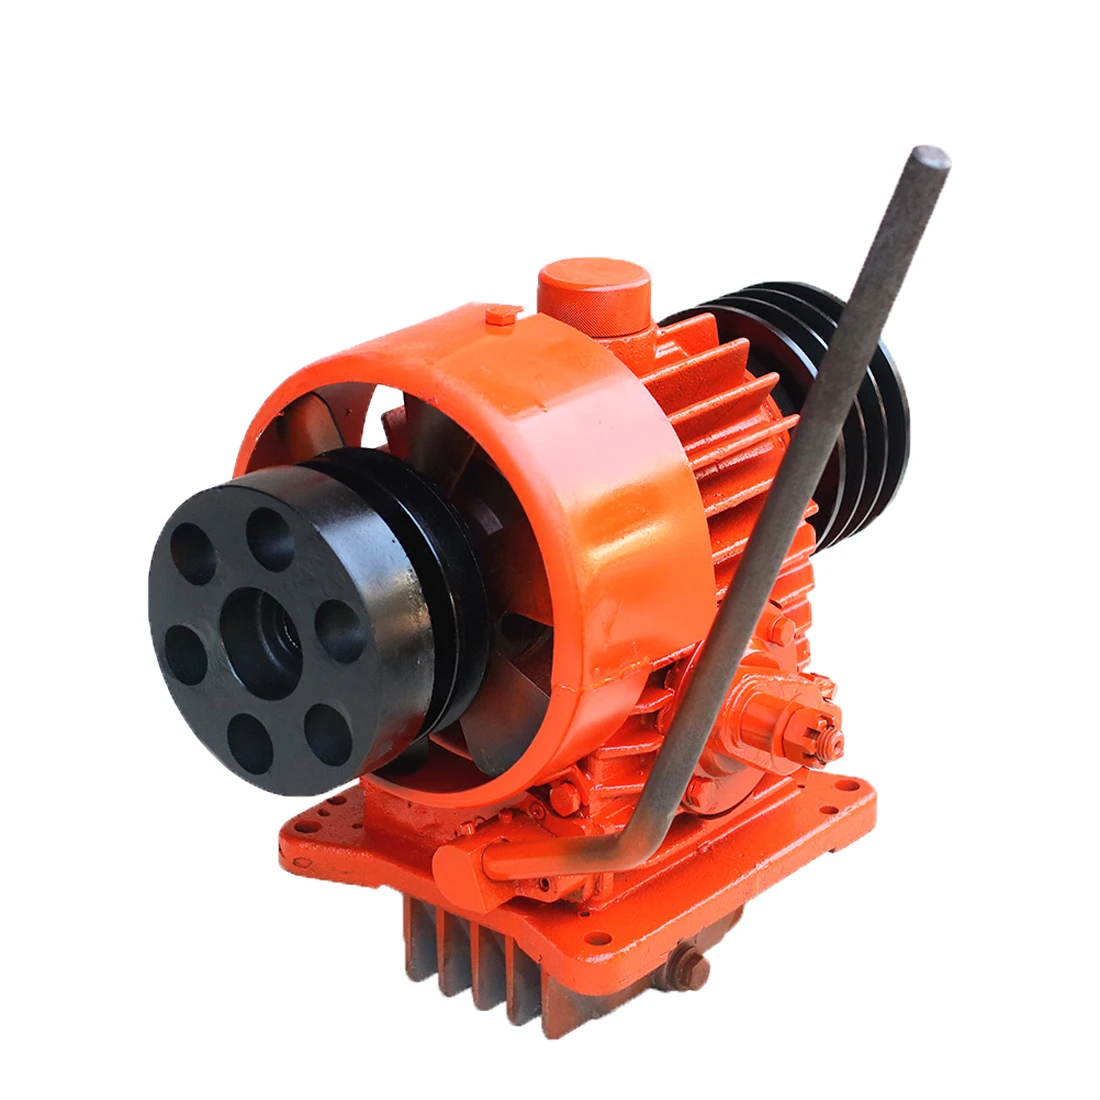 

Gearbox turbine box assembly/drilling rig's own/suitable for XY-1/XY-1A/XY-1B/XY-200/well drilling Geological exploration